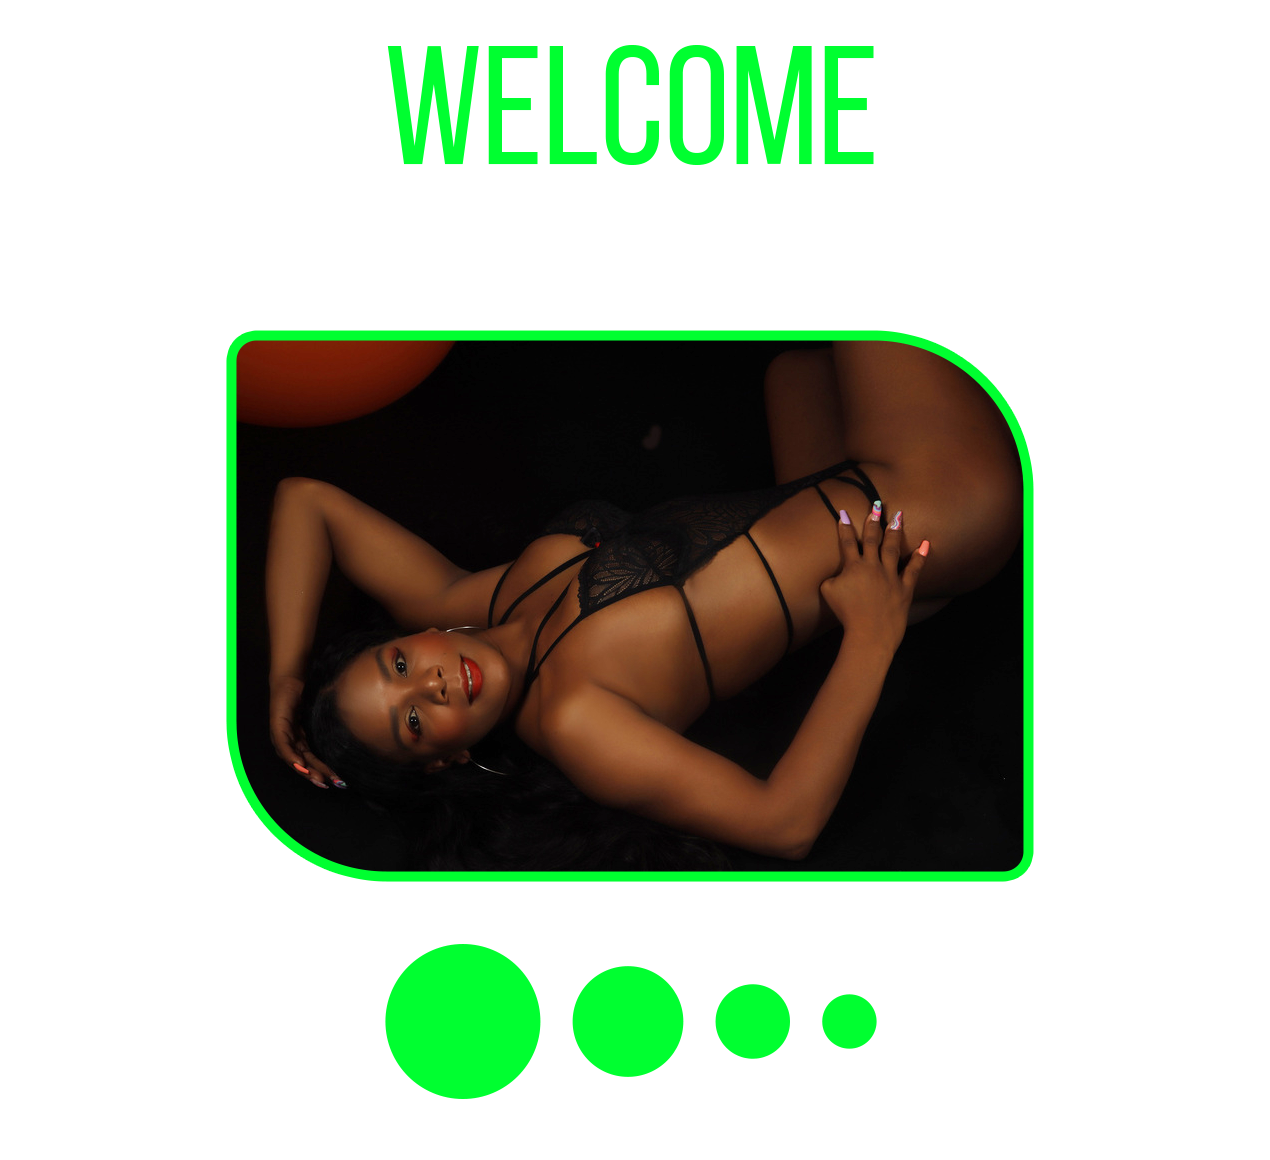 s-decker Hello friends. Welcome to the room of passion and pleasure! image: 12